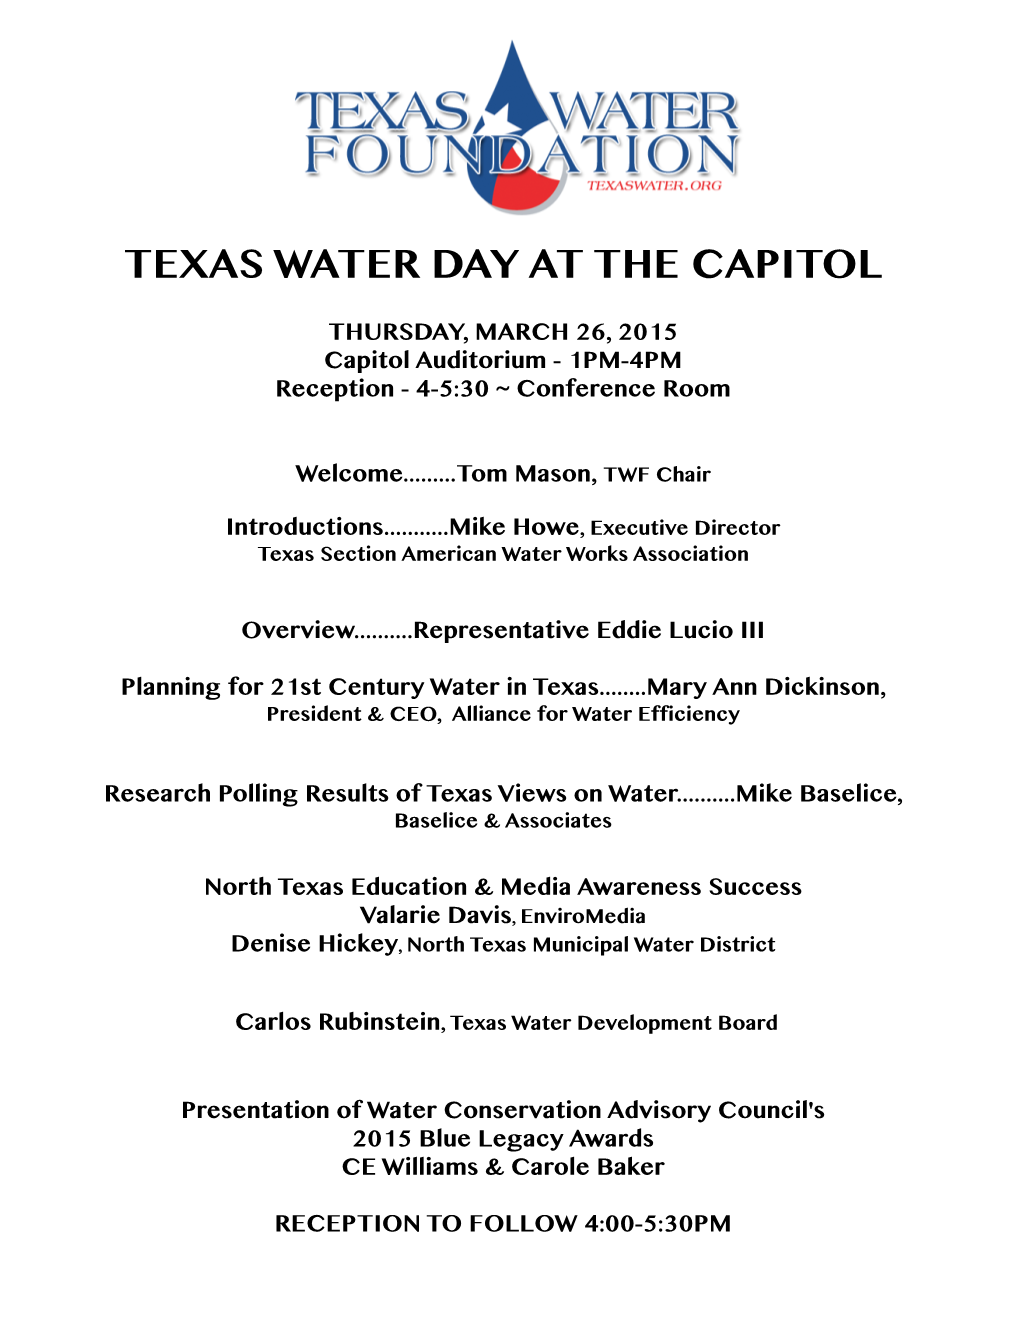 Texas Water Day at the Capitol 2015